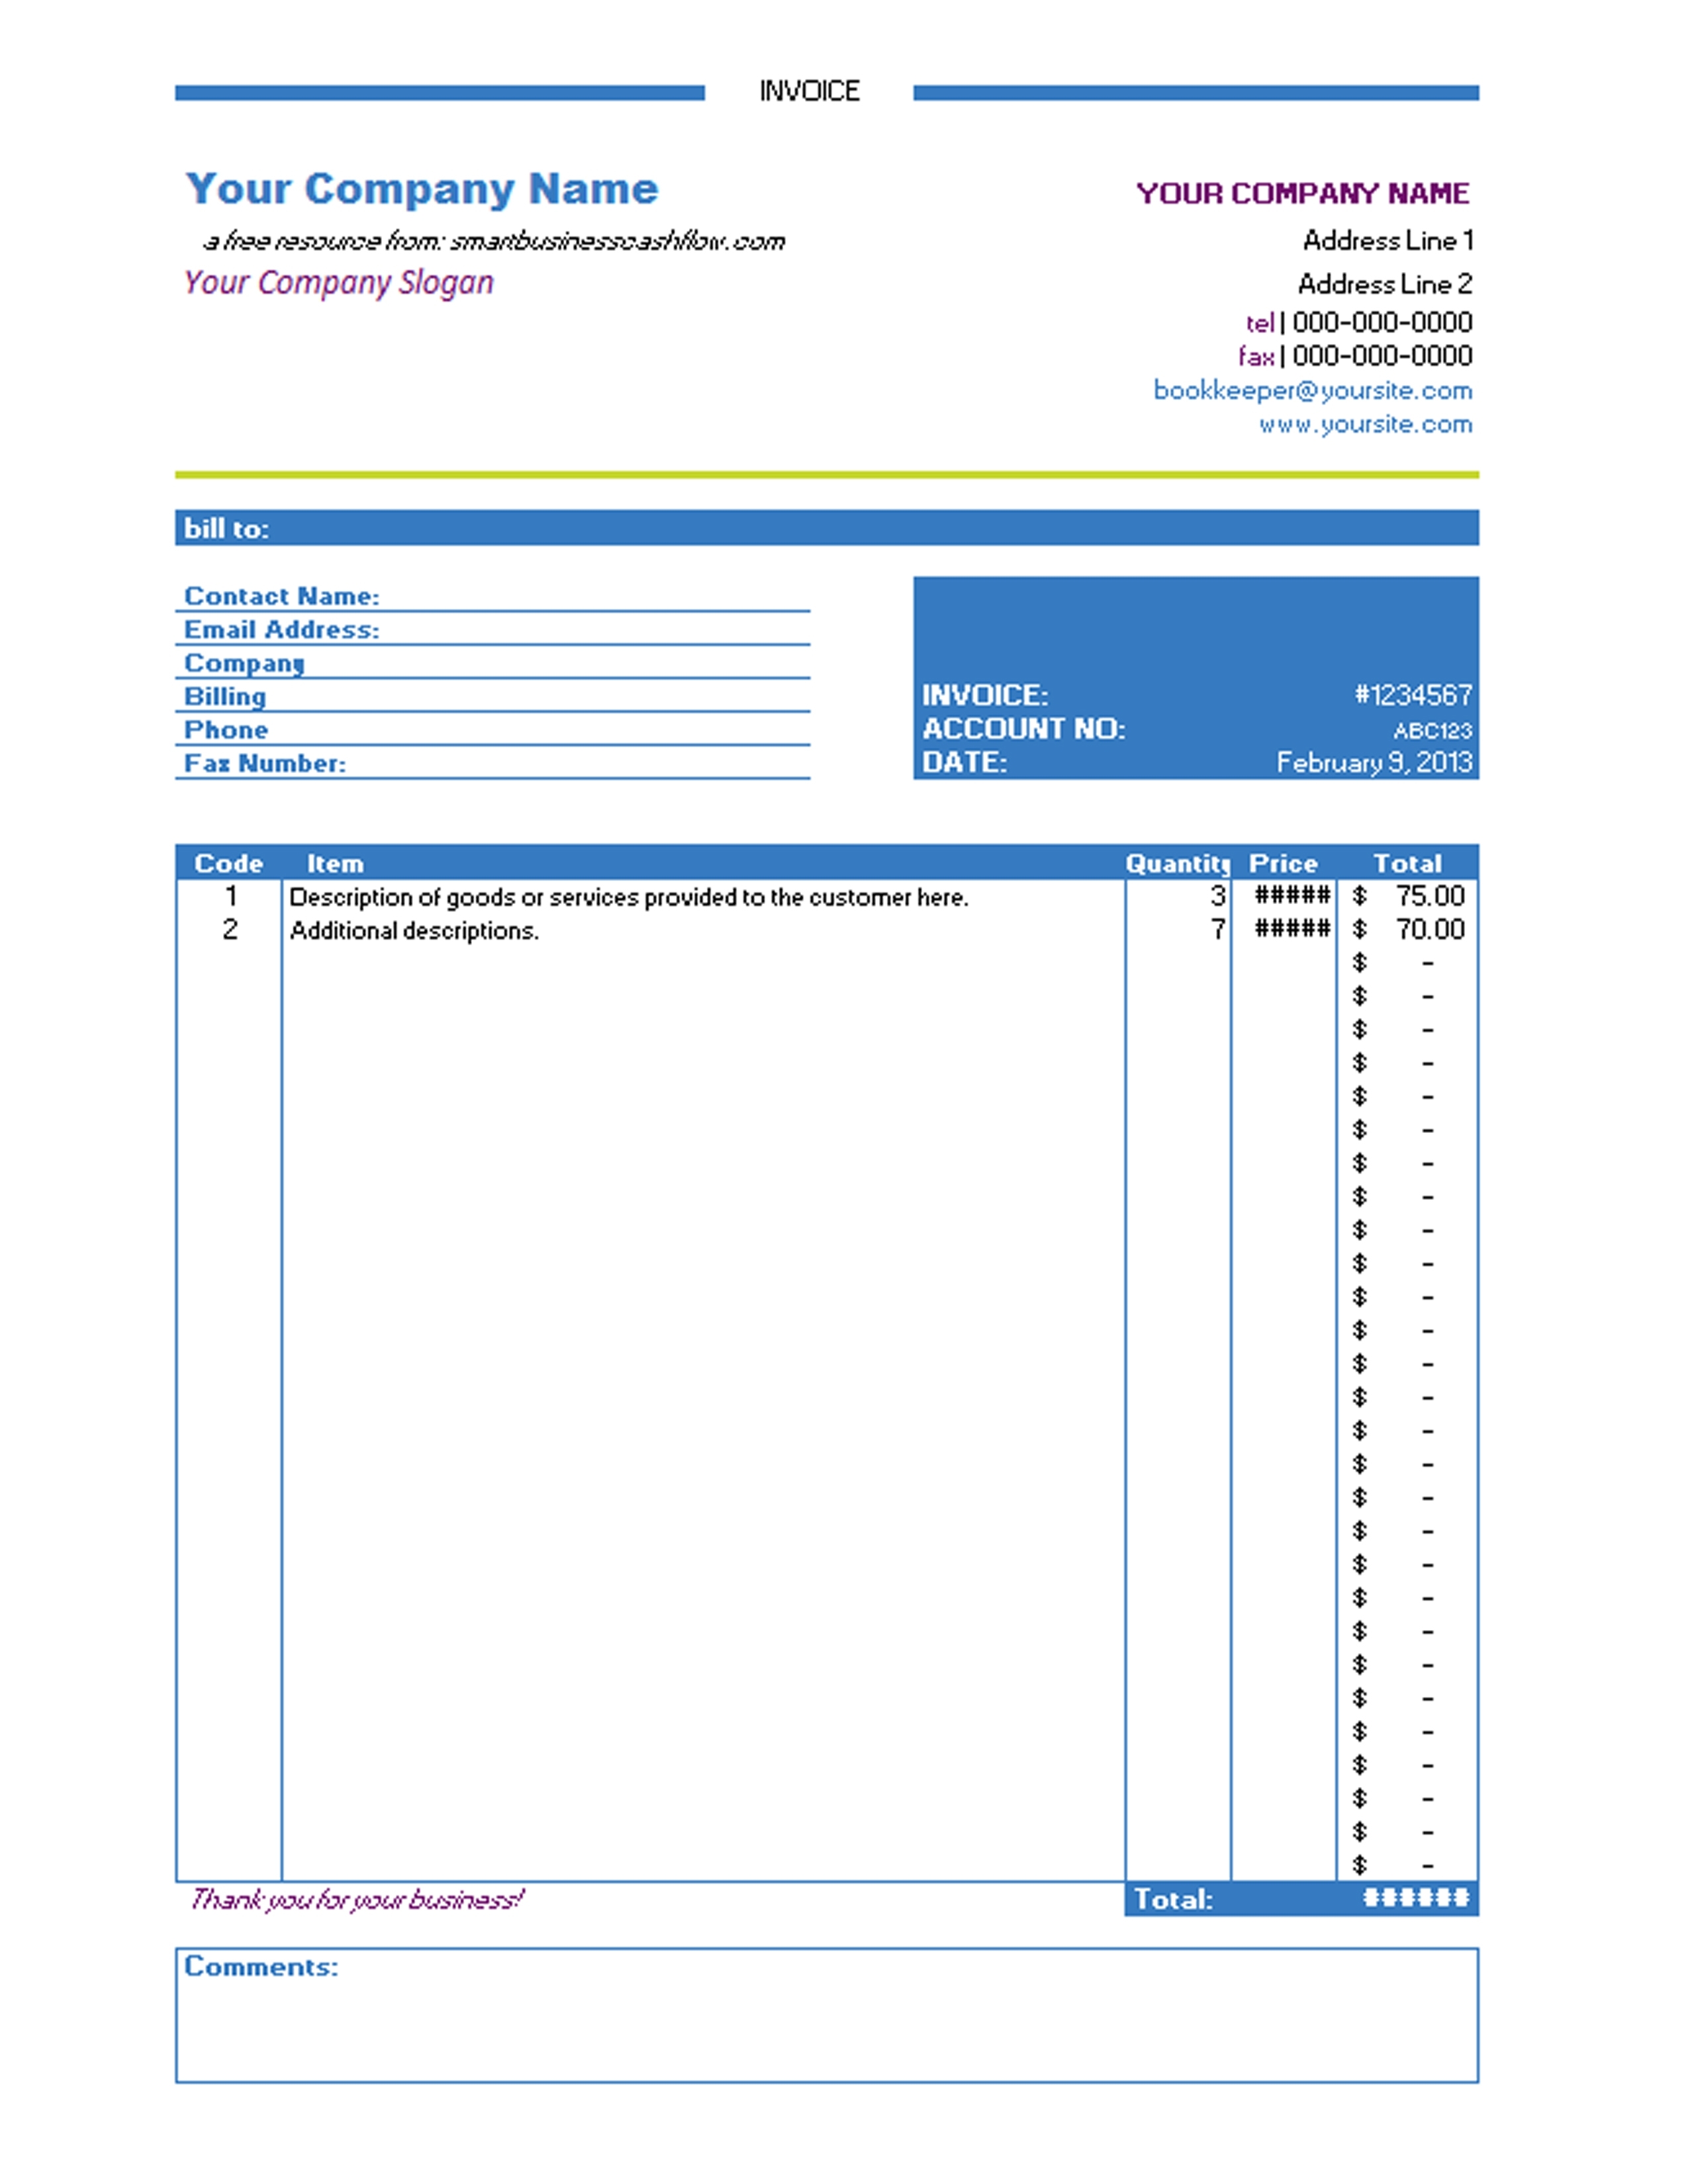 free invoice template uk excel invoice template free 2016 invoice template uk excel